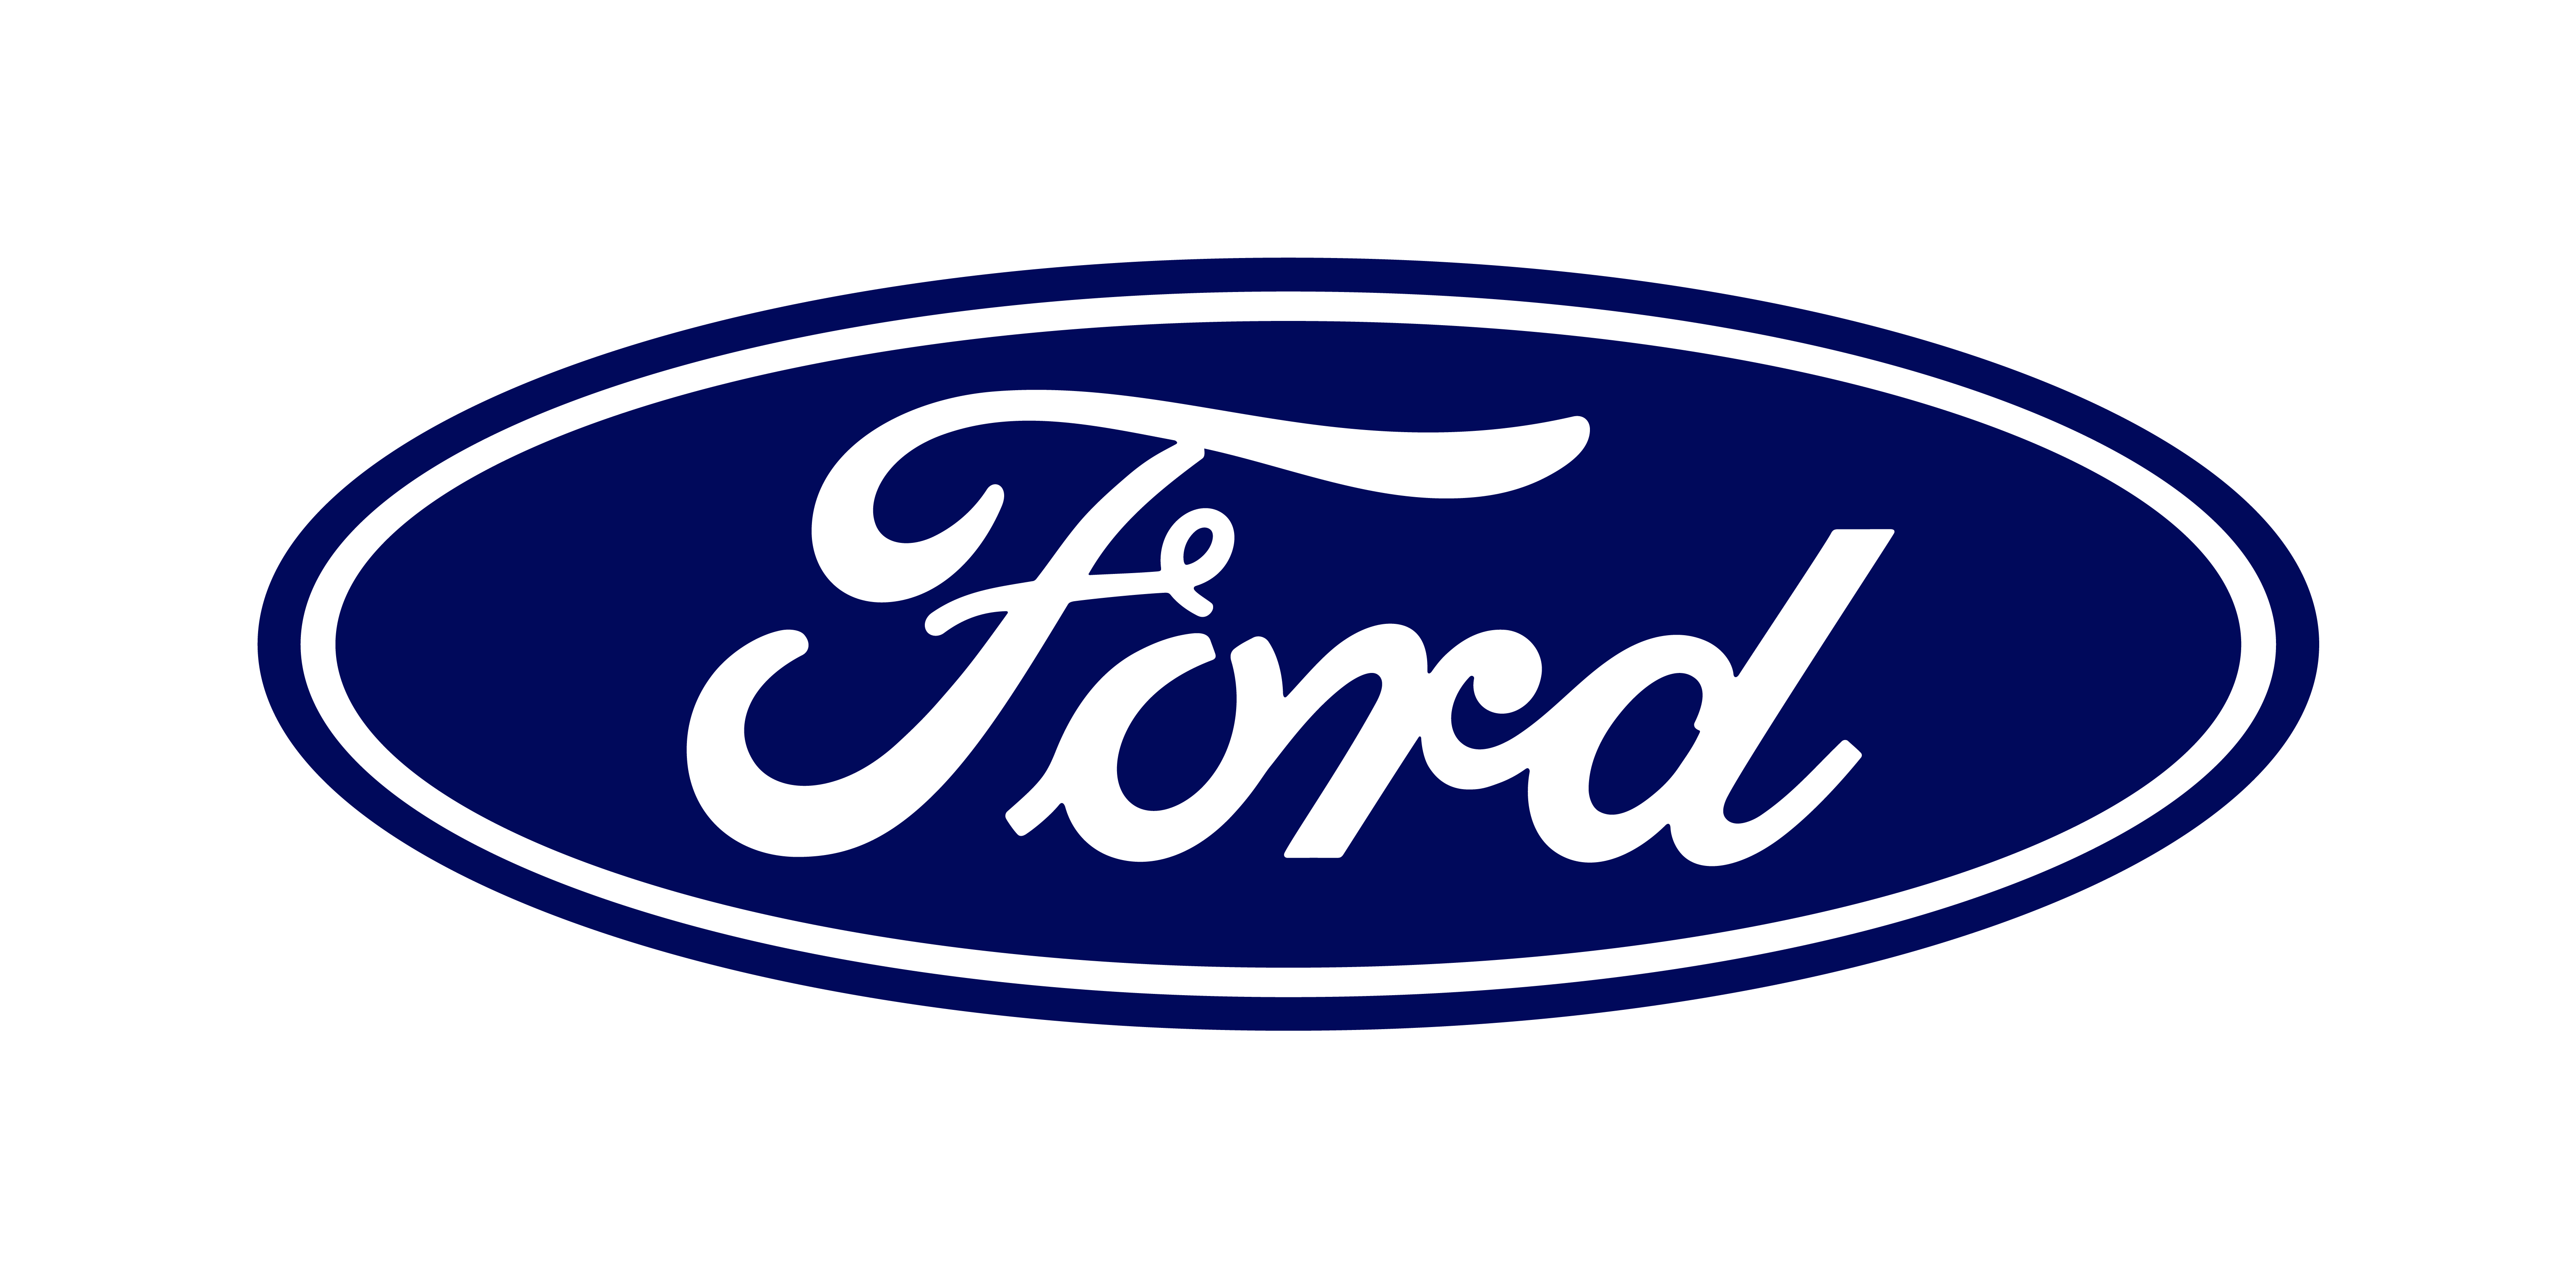 The Ford Test Drive